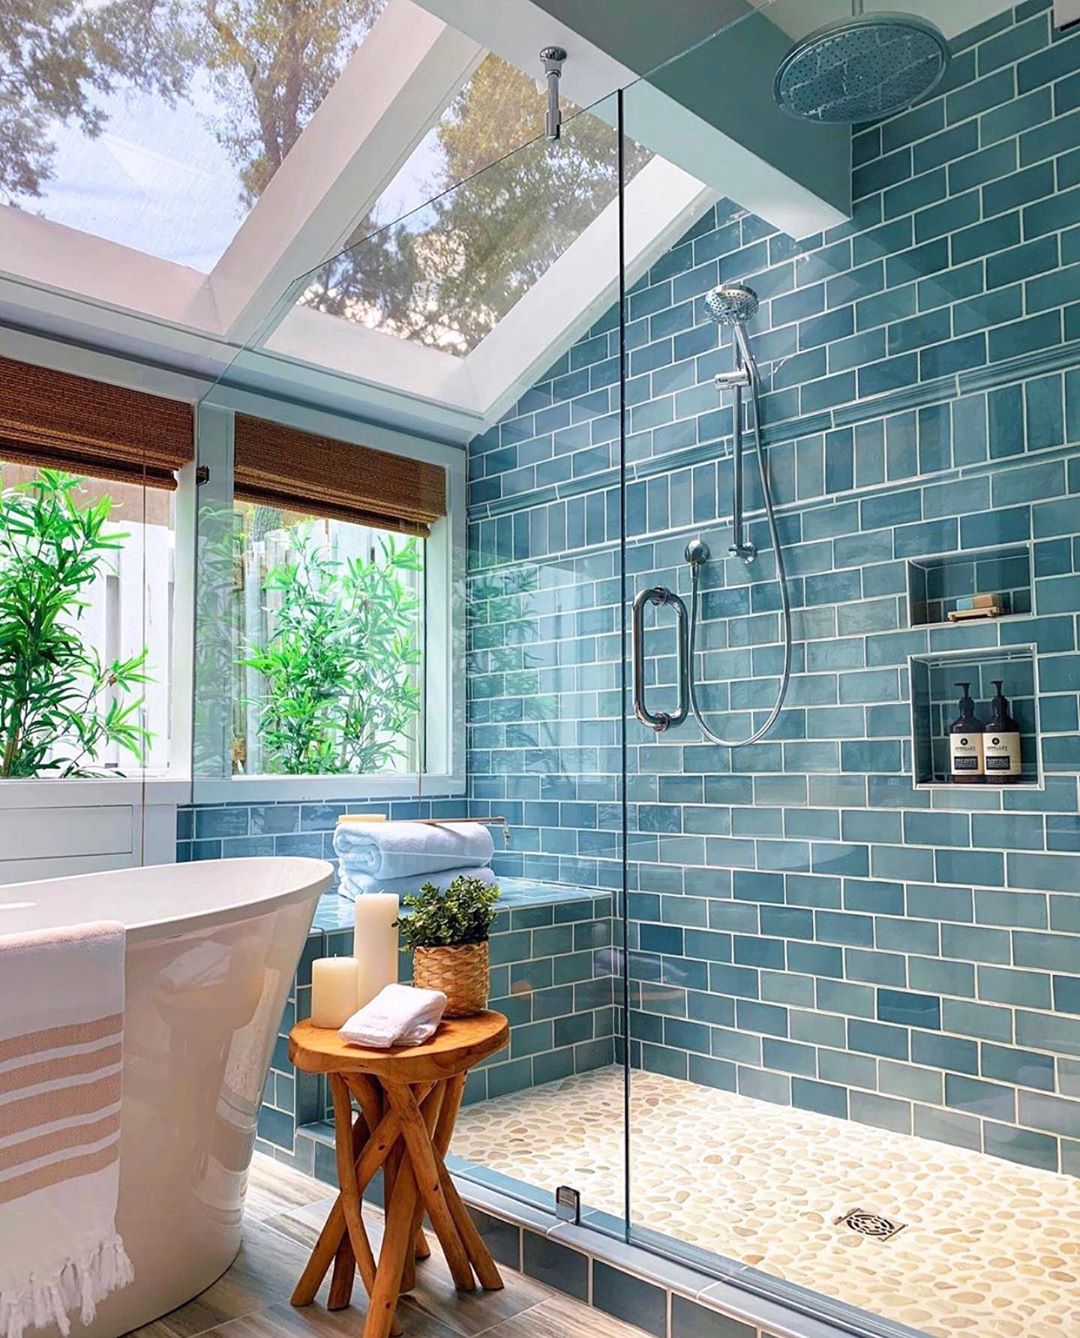 35 Simple And Beautiful Small Bathroom Ideas 2019 - Page 37 of 37 - My Blog